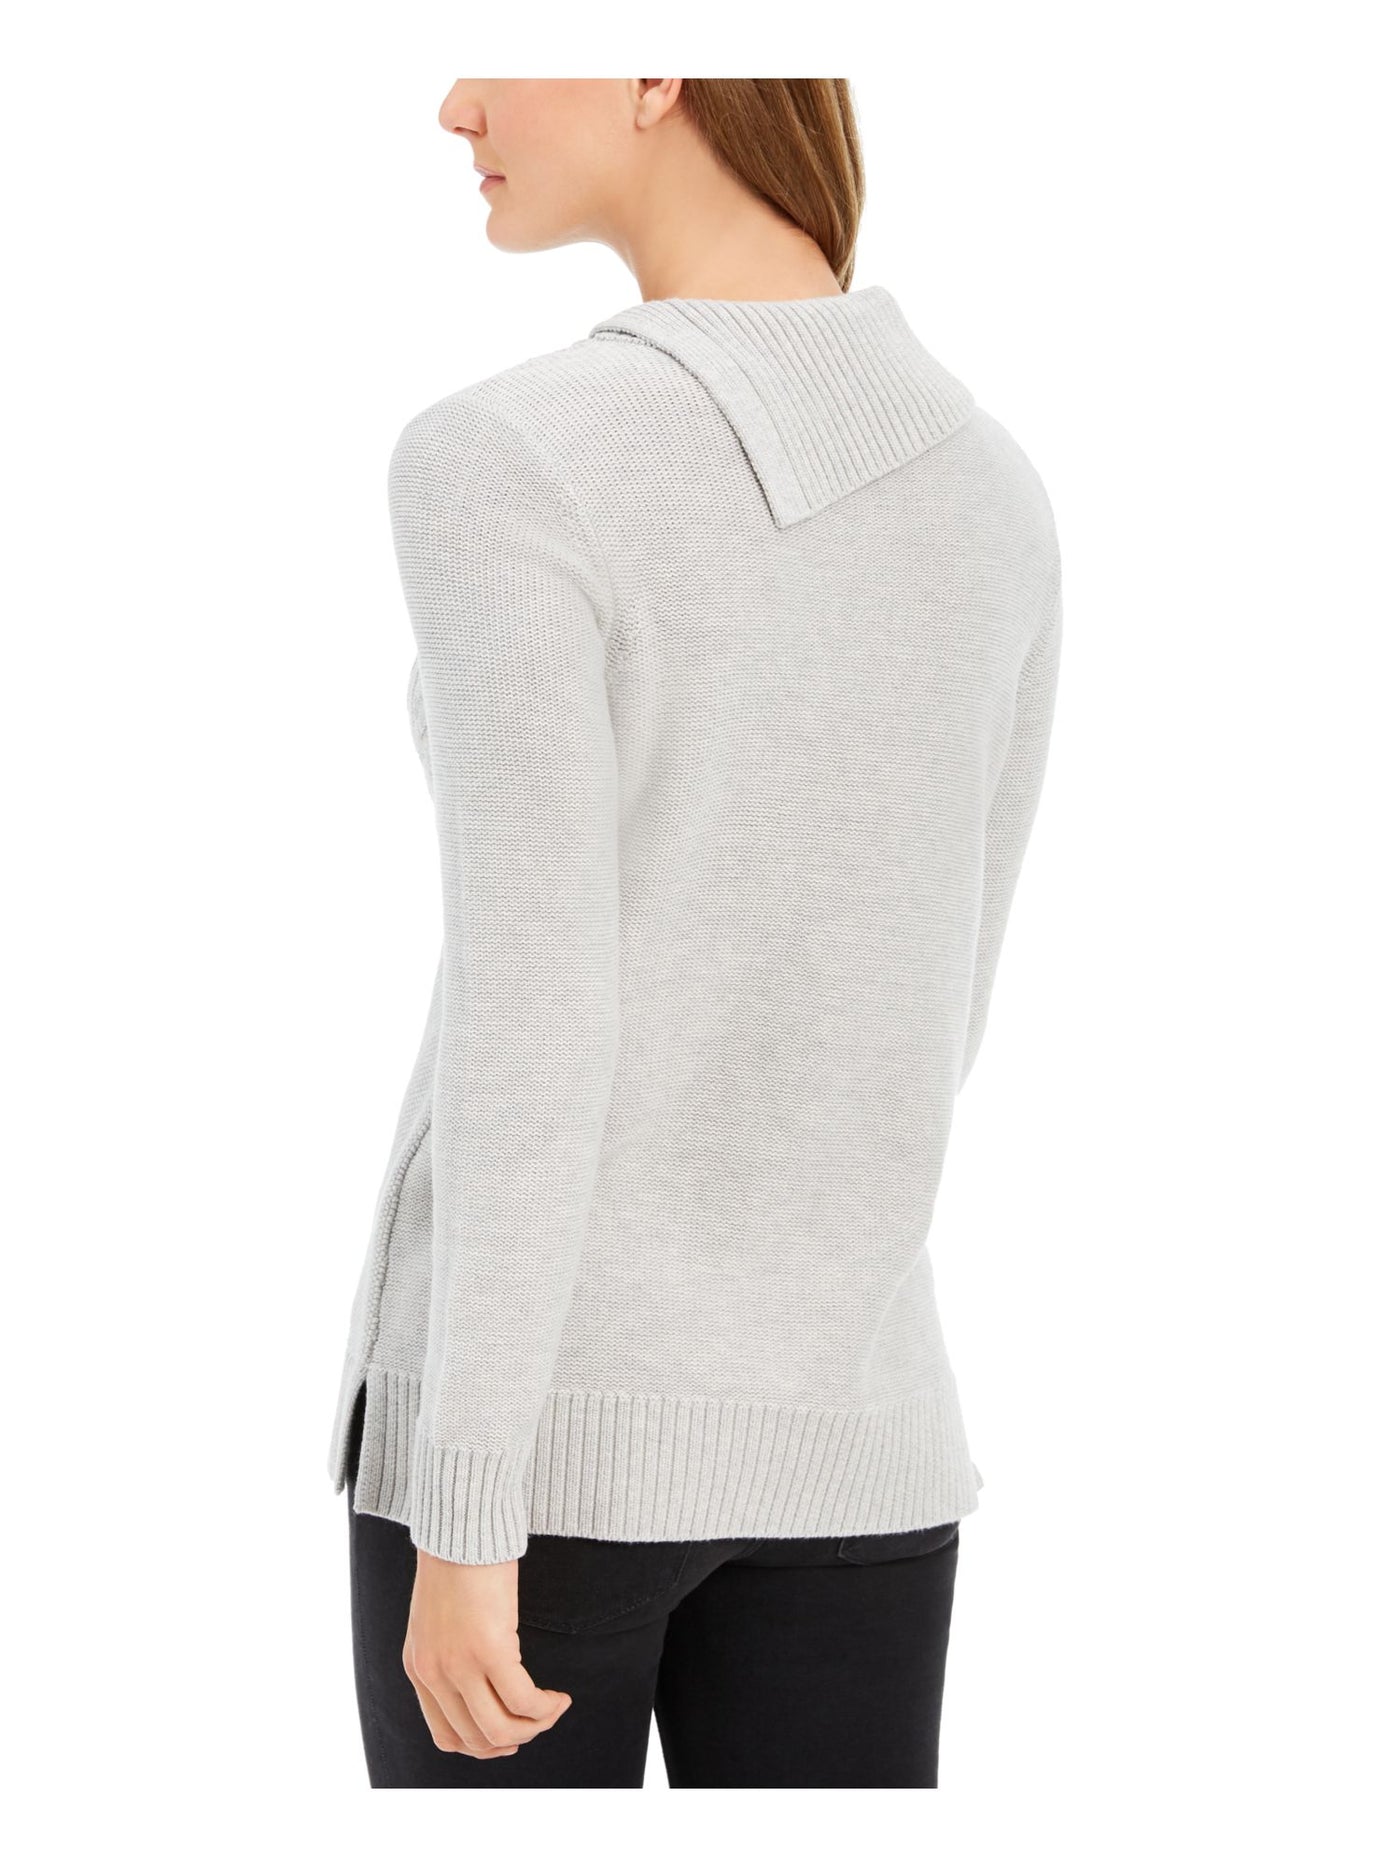 CHARTER CLUB Womens Silver Ribbed Heather Long Sleeve Cowl Neck Sweater L